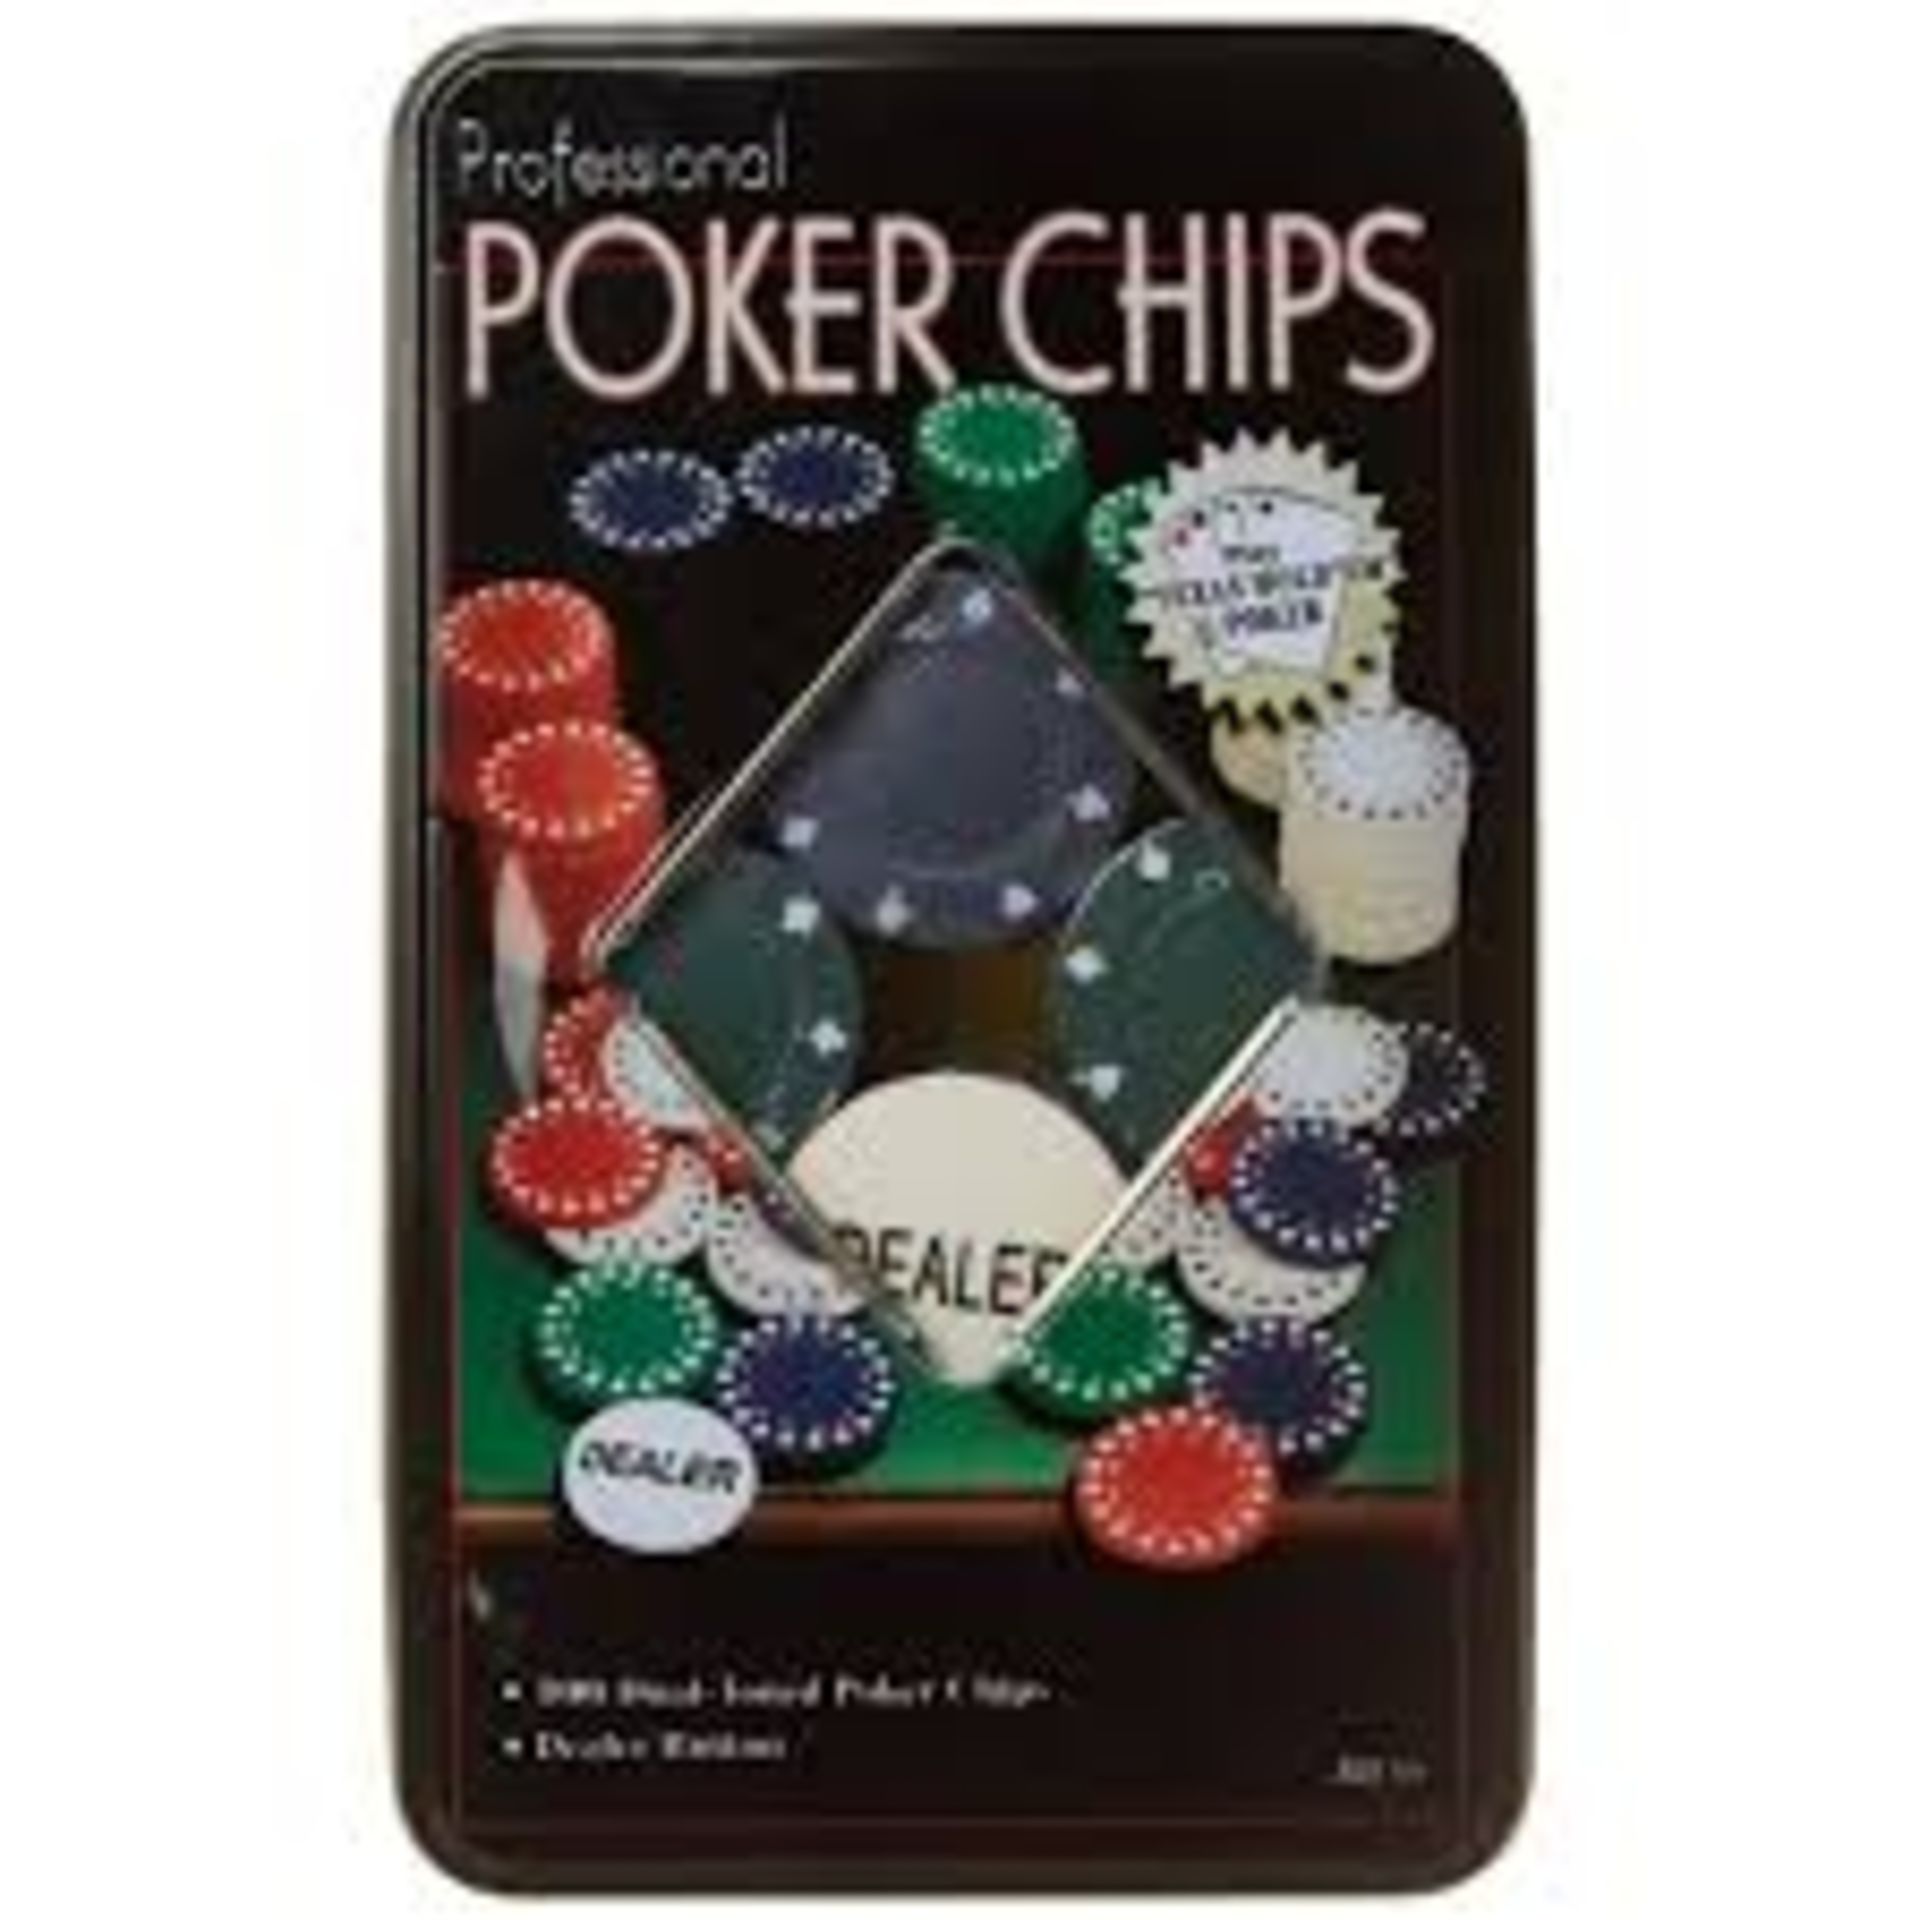 + VAT Brand New Box Of 100 Dual-Toned Professional Poker Chips Includes Dealer Button - Image 2 of 2